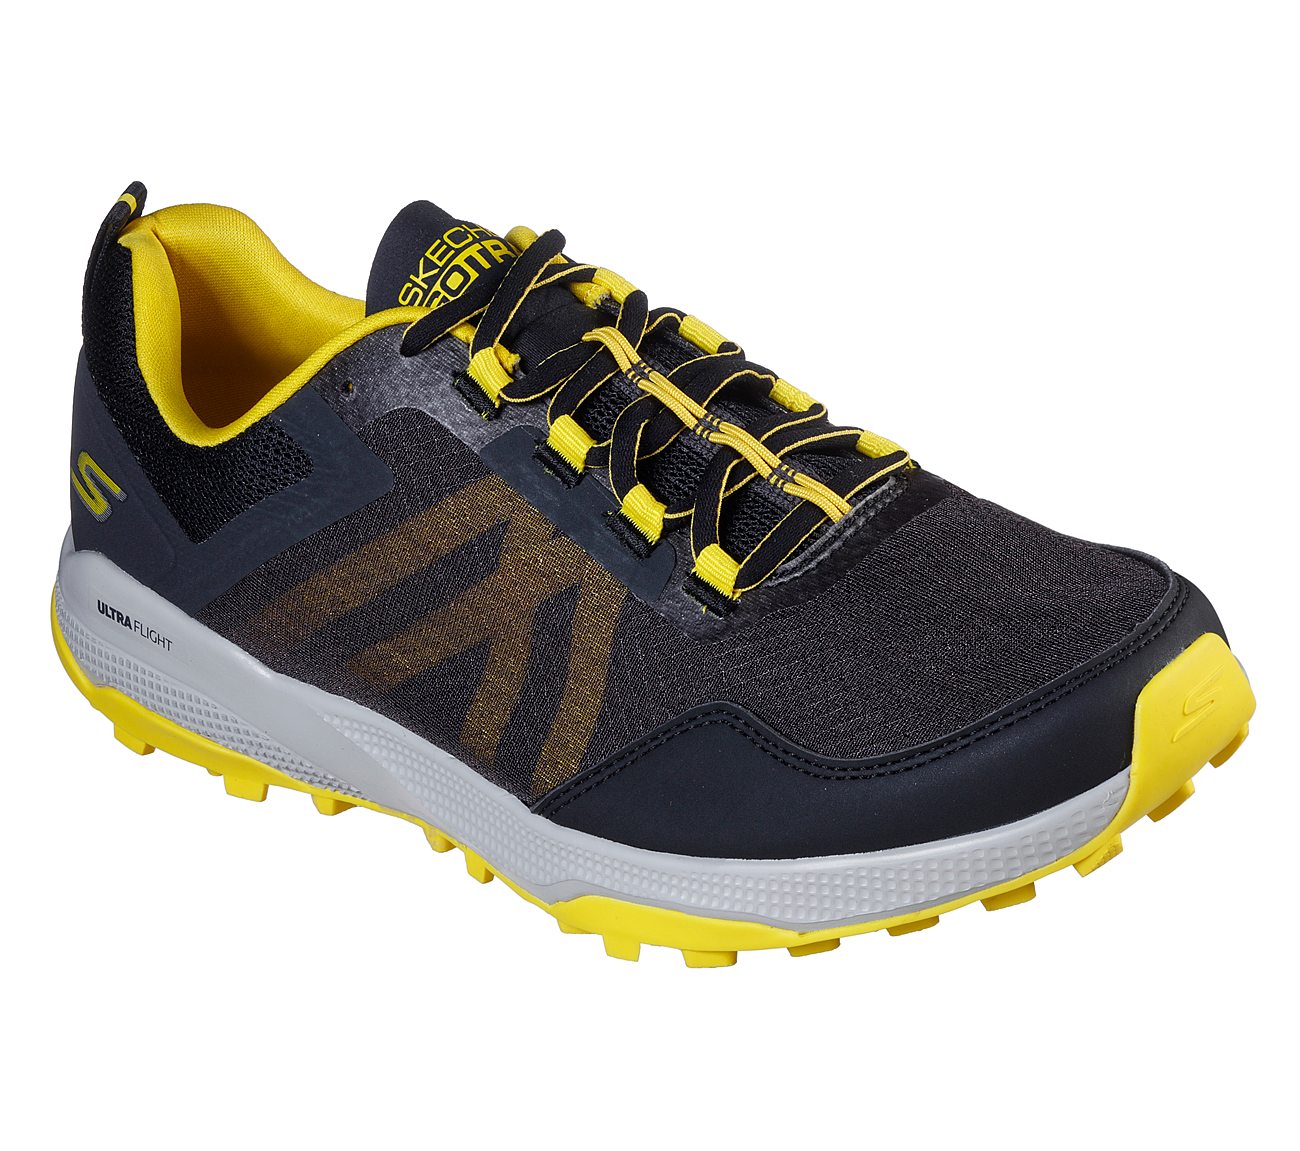 PURE TRAIL, BLACK/YELLOW Footwear Right View